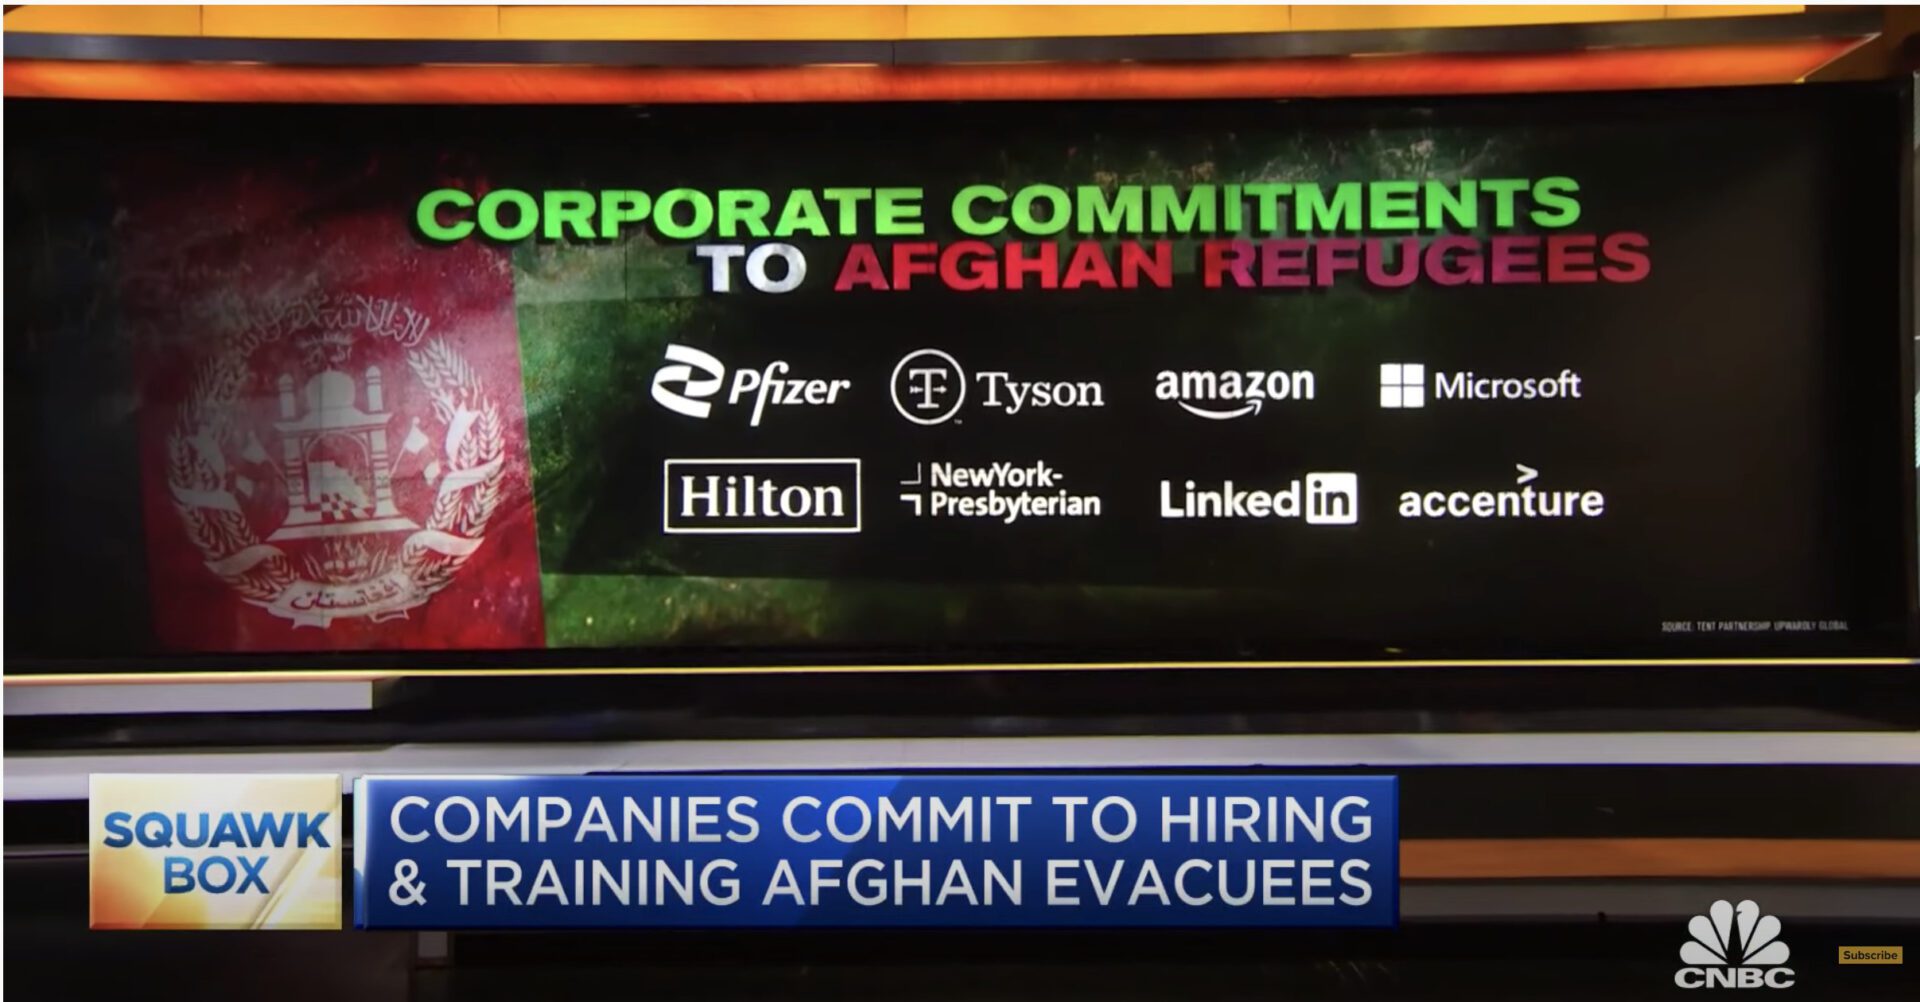 Upwardly Global Featured on CNBC’s “Squawk Box” in Discussion of Companies Hiring Afghan Arrivals